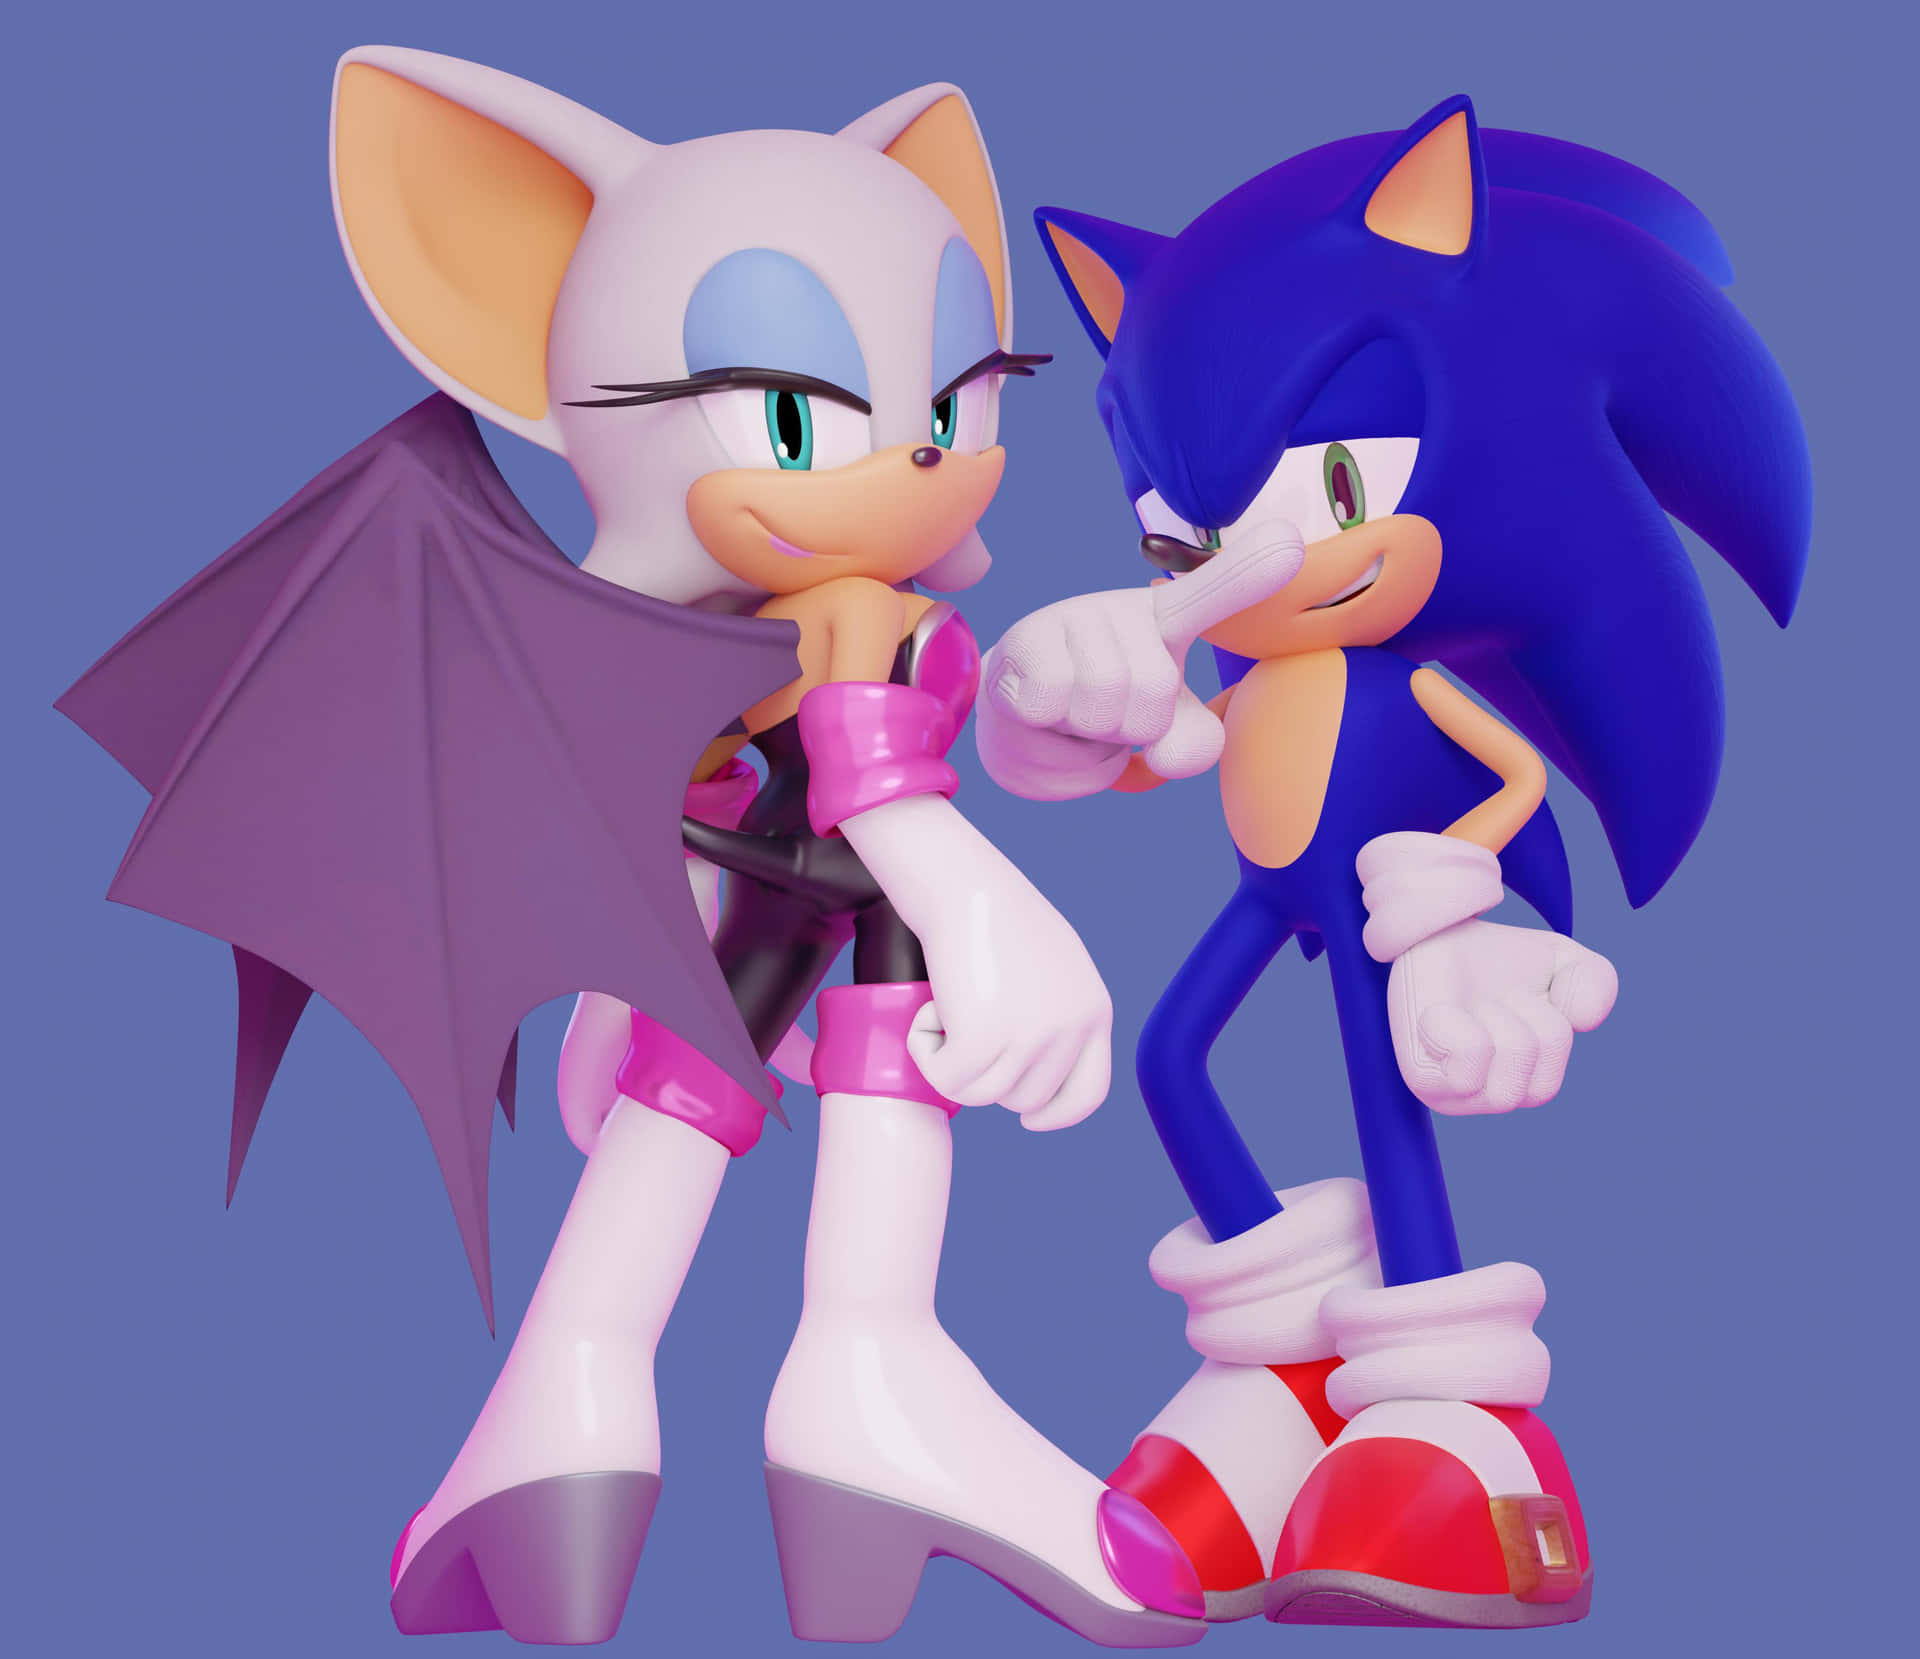 Sonic and Rouge: Buddies on an Adventure Wallpaper